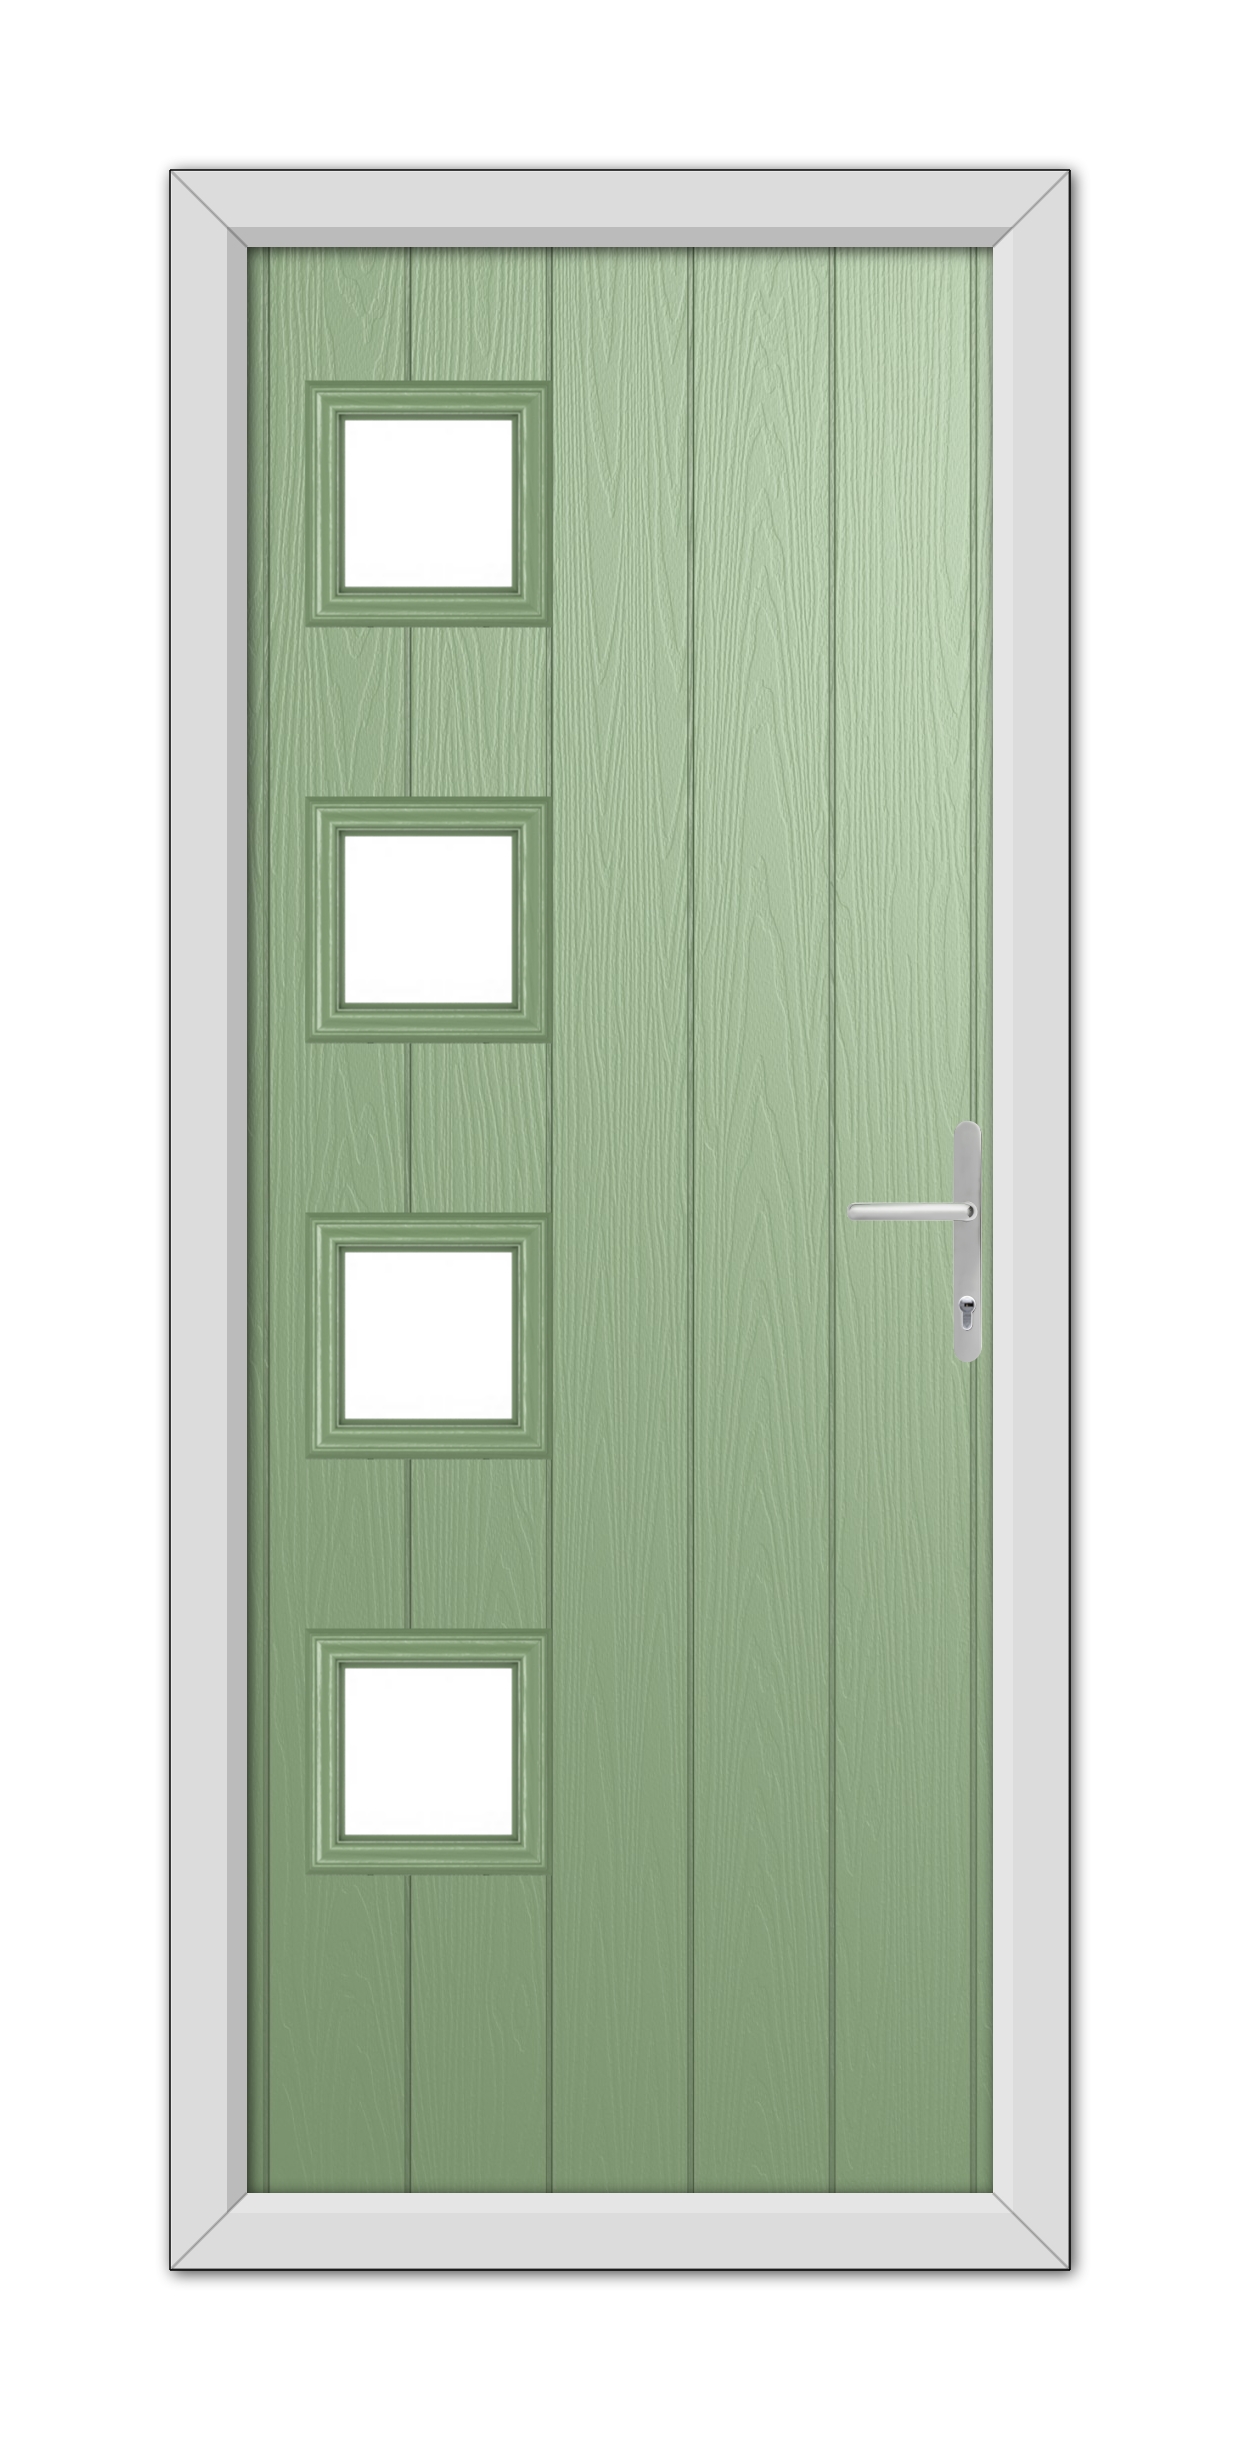 A Chartwell Green Sussex Composite Door 48mm Timber Core with four rectangular windows, fitted in a gray frame, isolated on a white background.